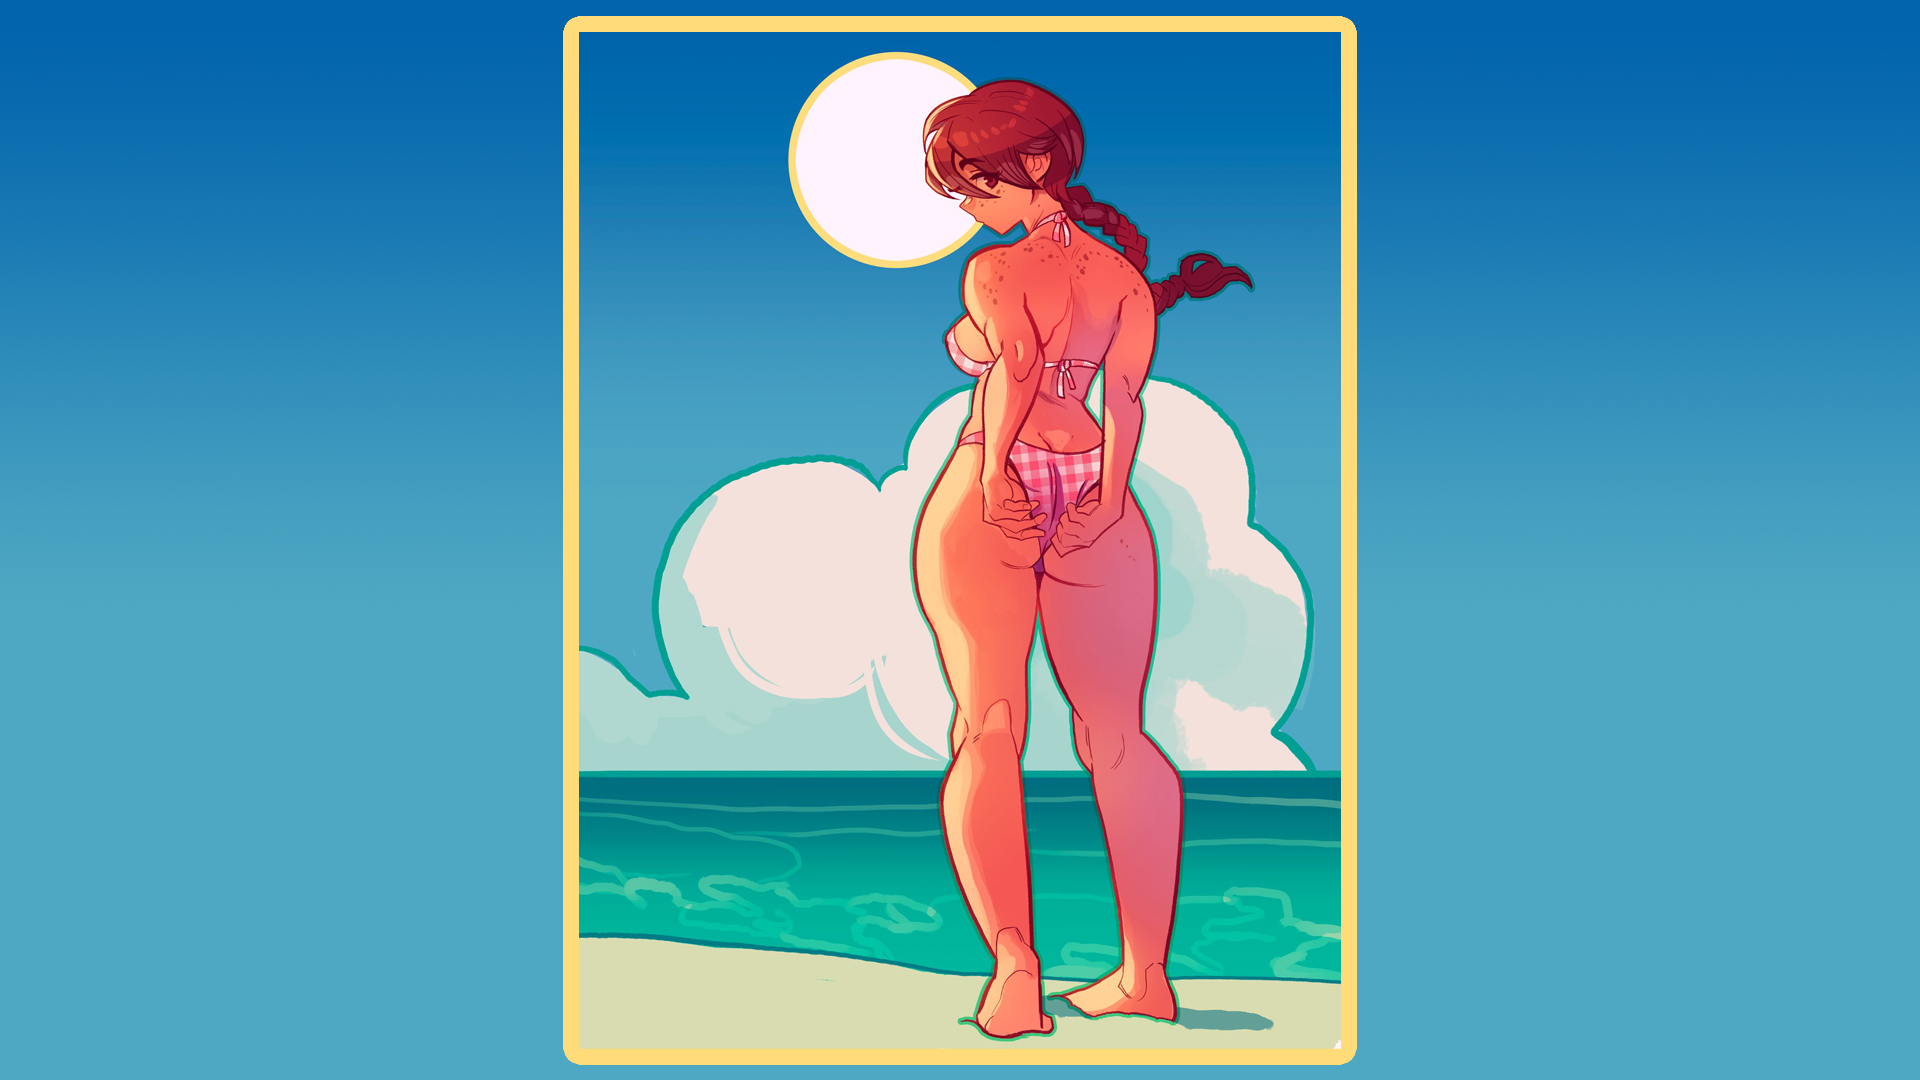 Anime 1920x1080 Neal D Anderson pulling panties beach rear view redhead gradient clouds water blue background feet thighs pink bikini sideboob freckles bikini looking at viewer tanned plaid clothing